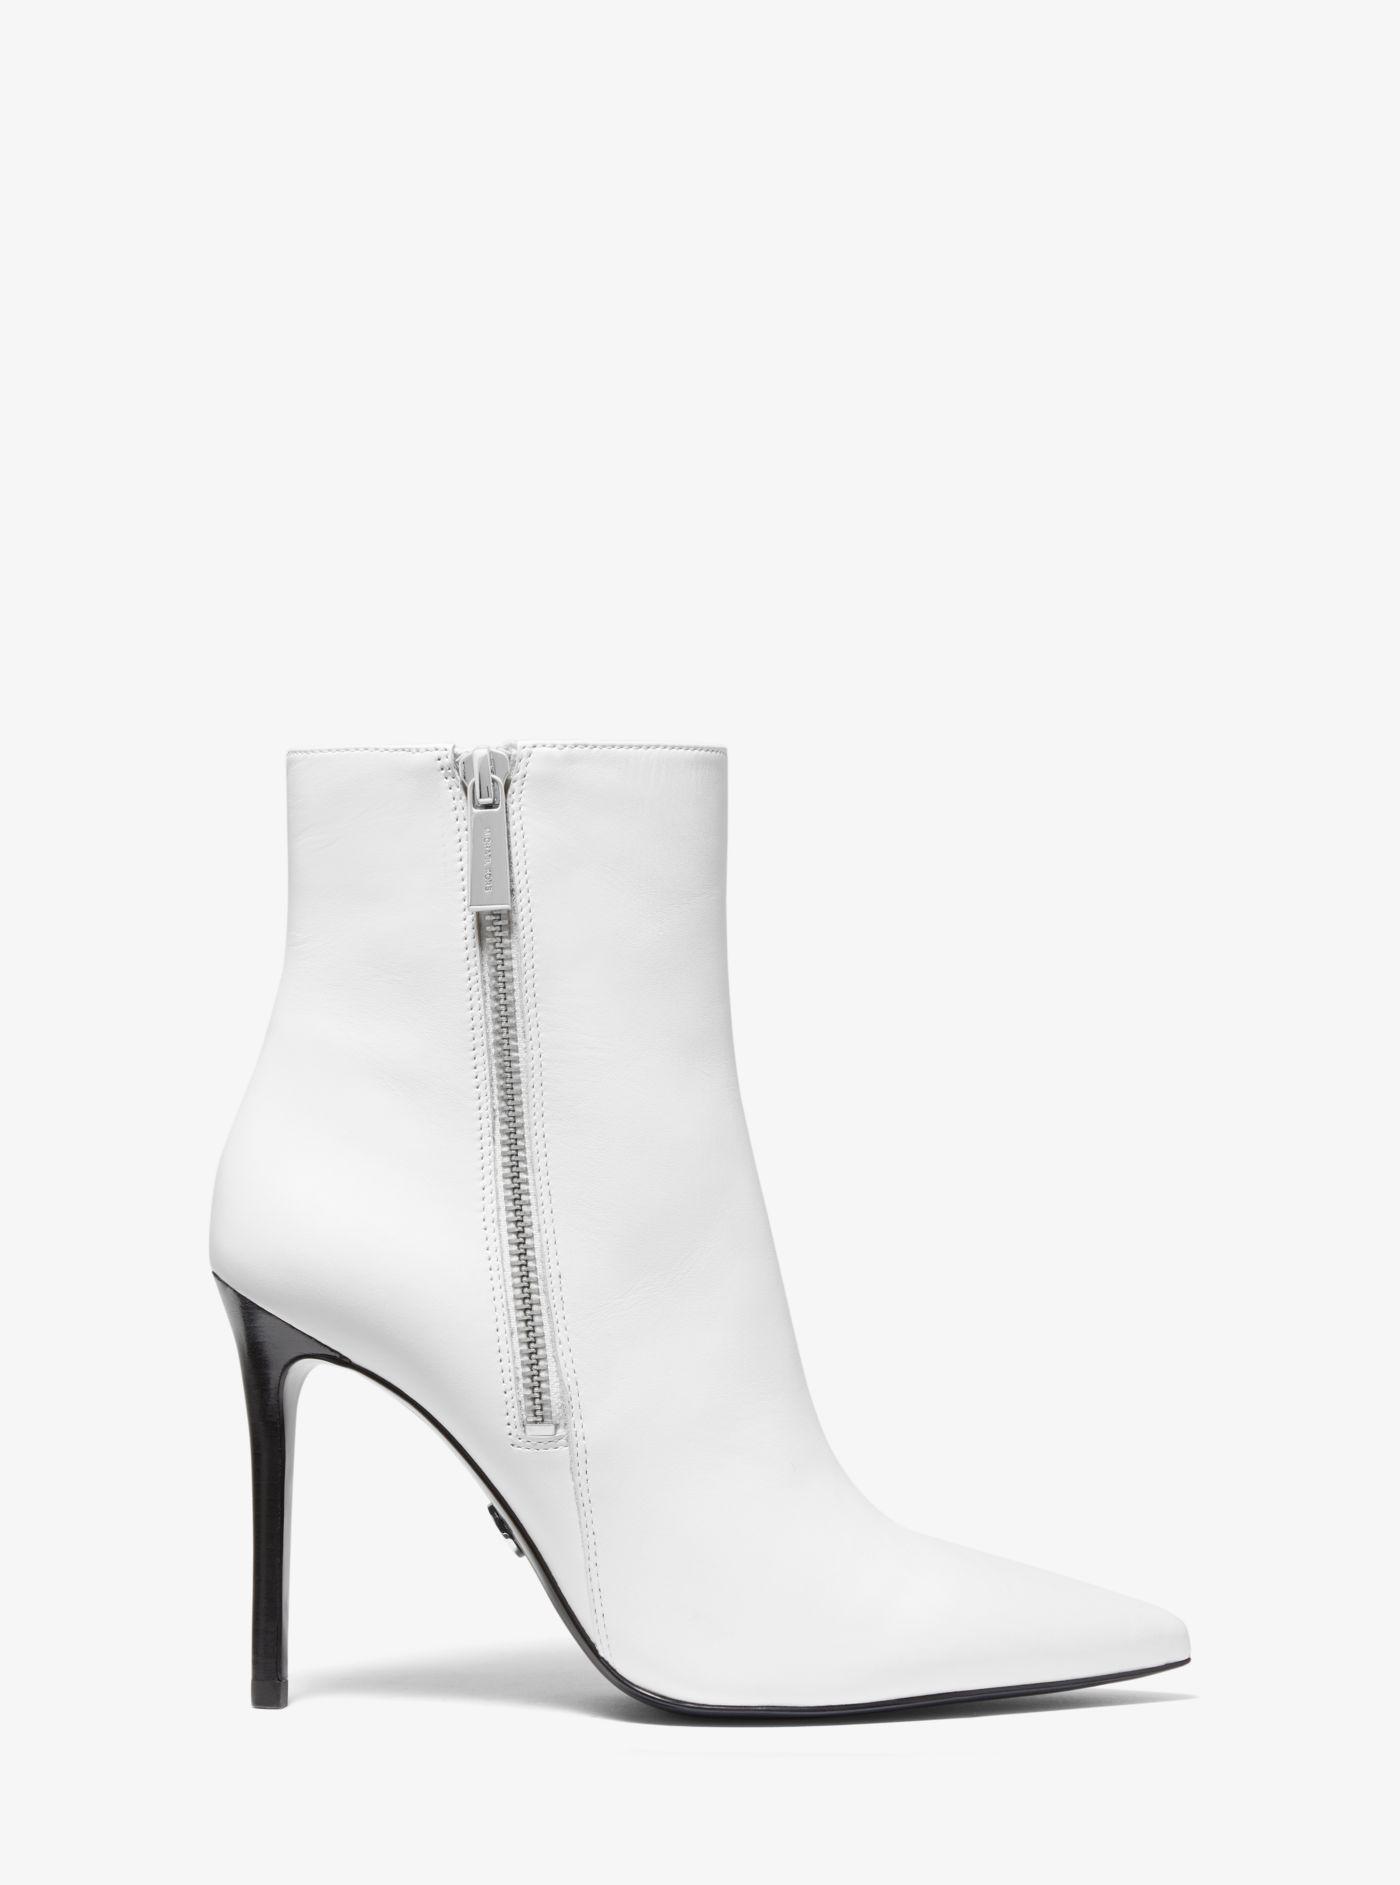 Michael Kors Keke Leather Ankle Boot in White | Lyst